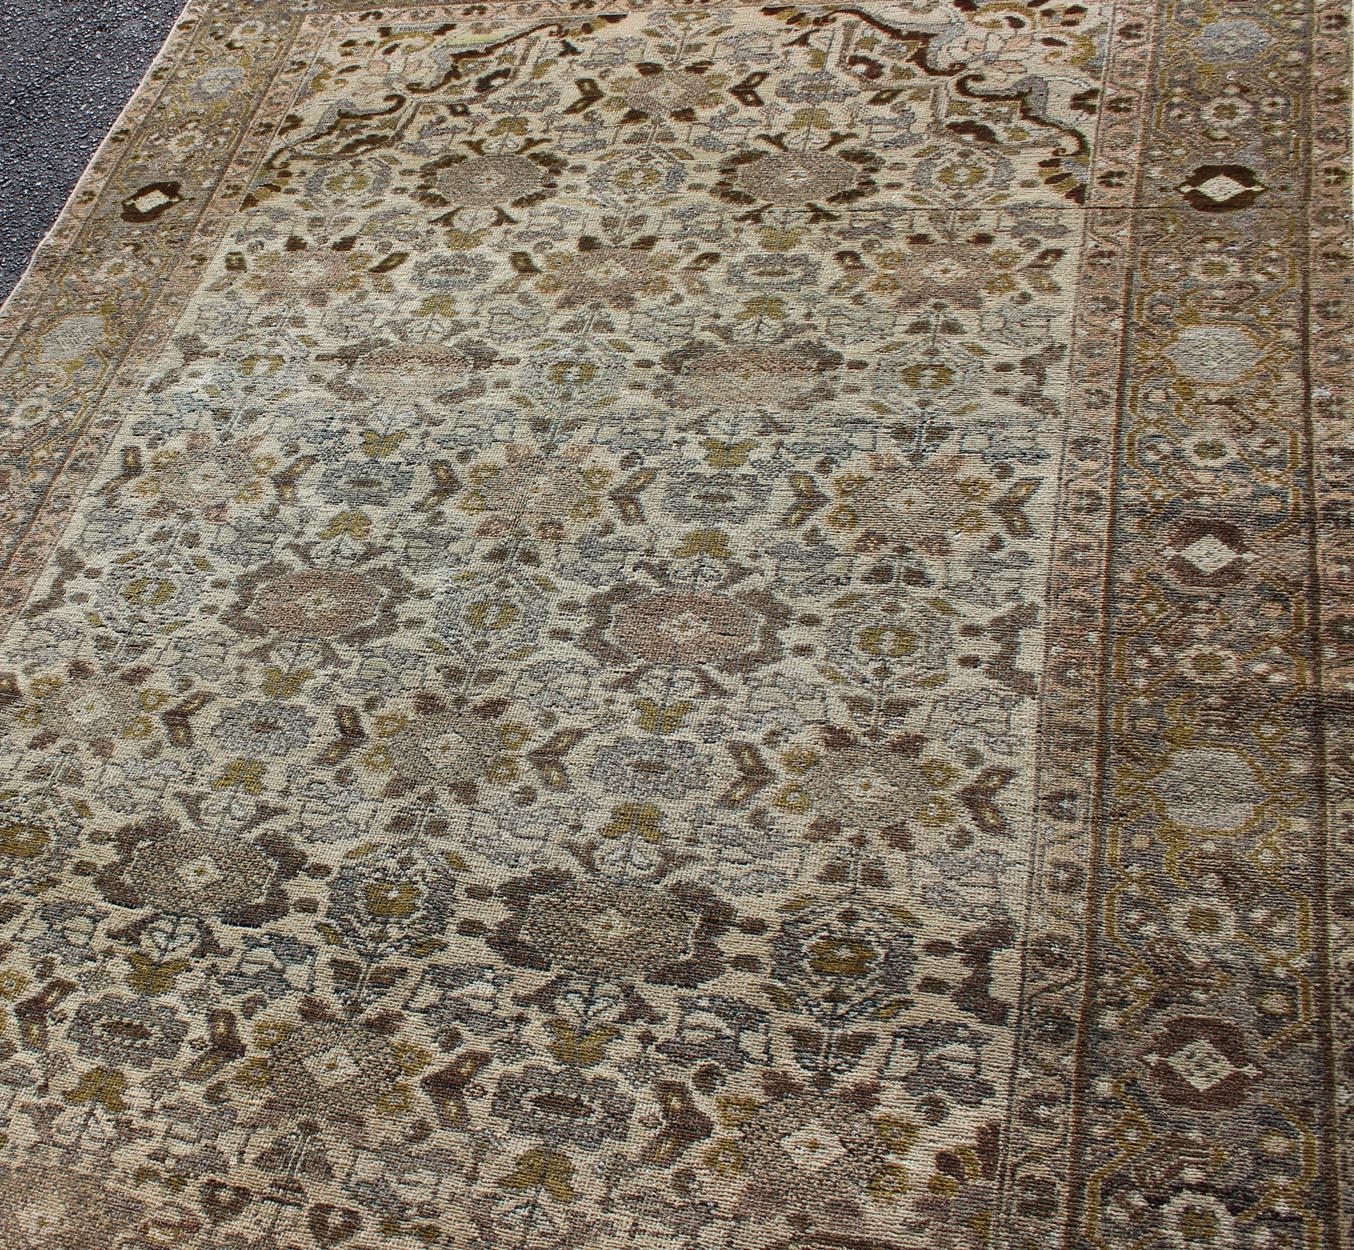 Antique Persian Malayer Rug with All-Over Boteh Design in Earth Tones 2